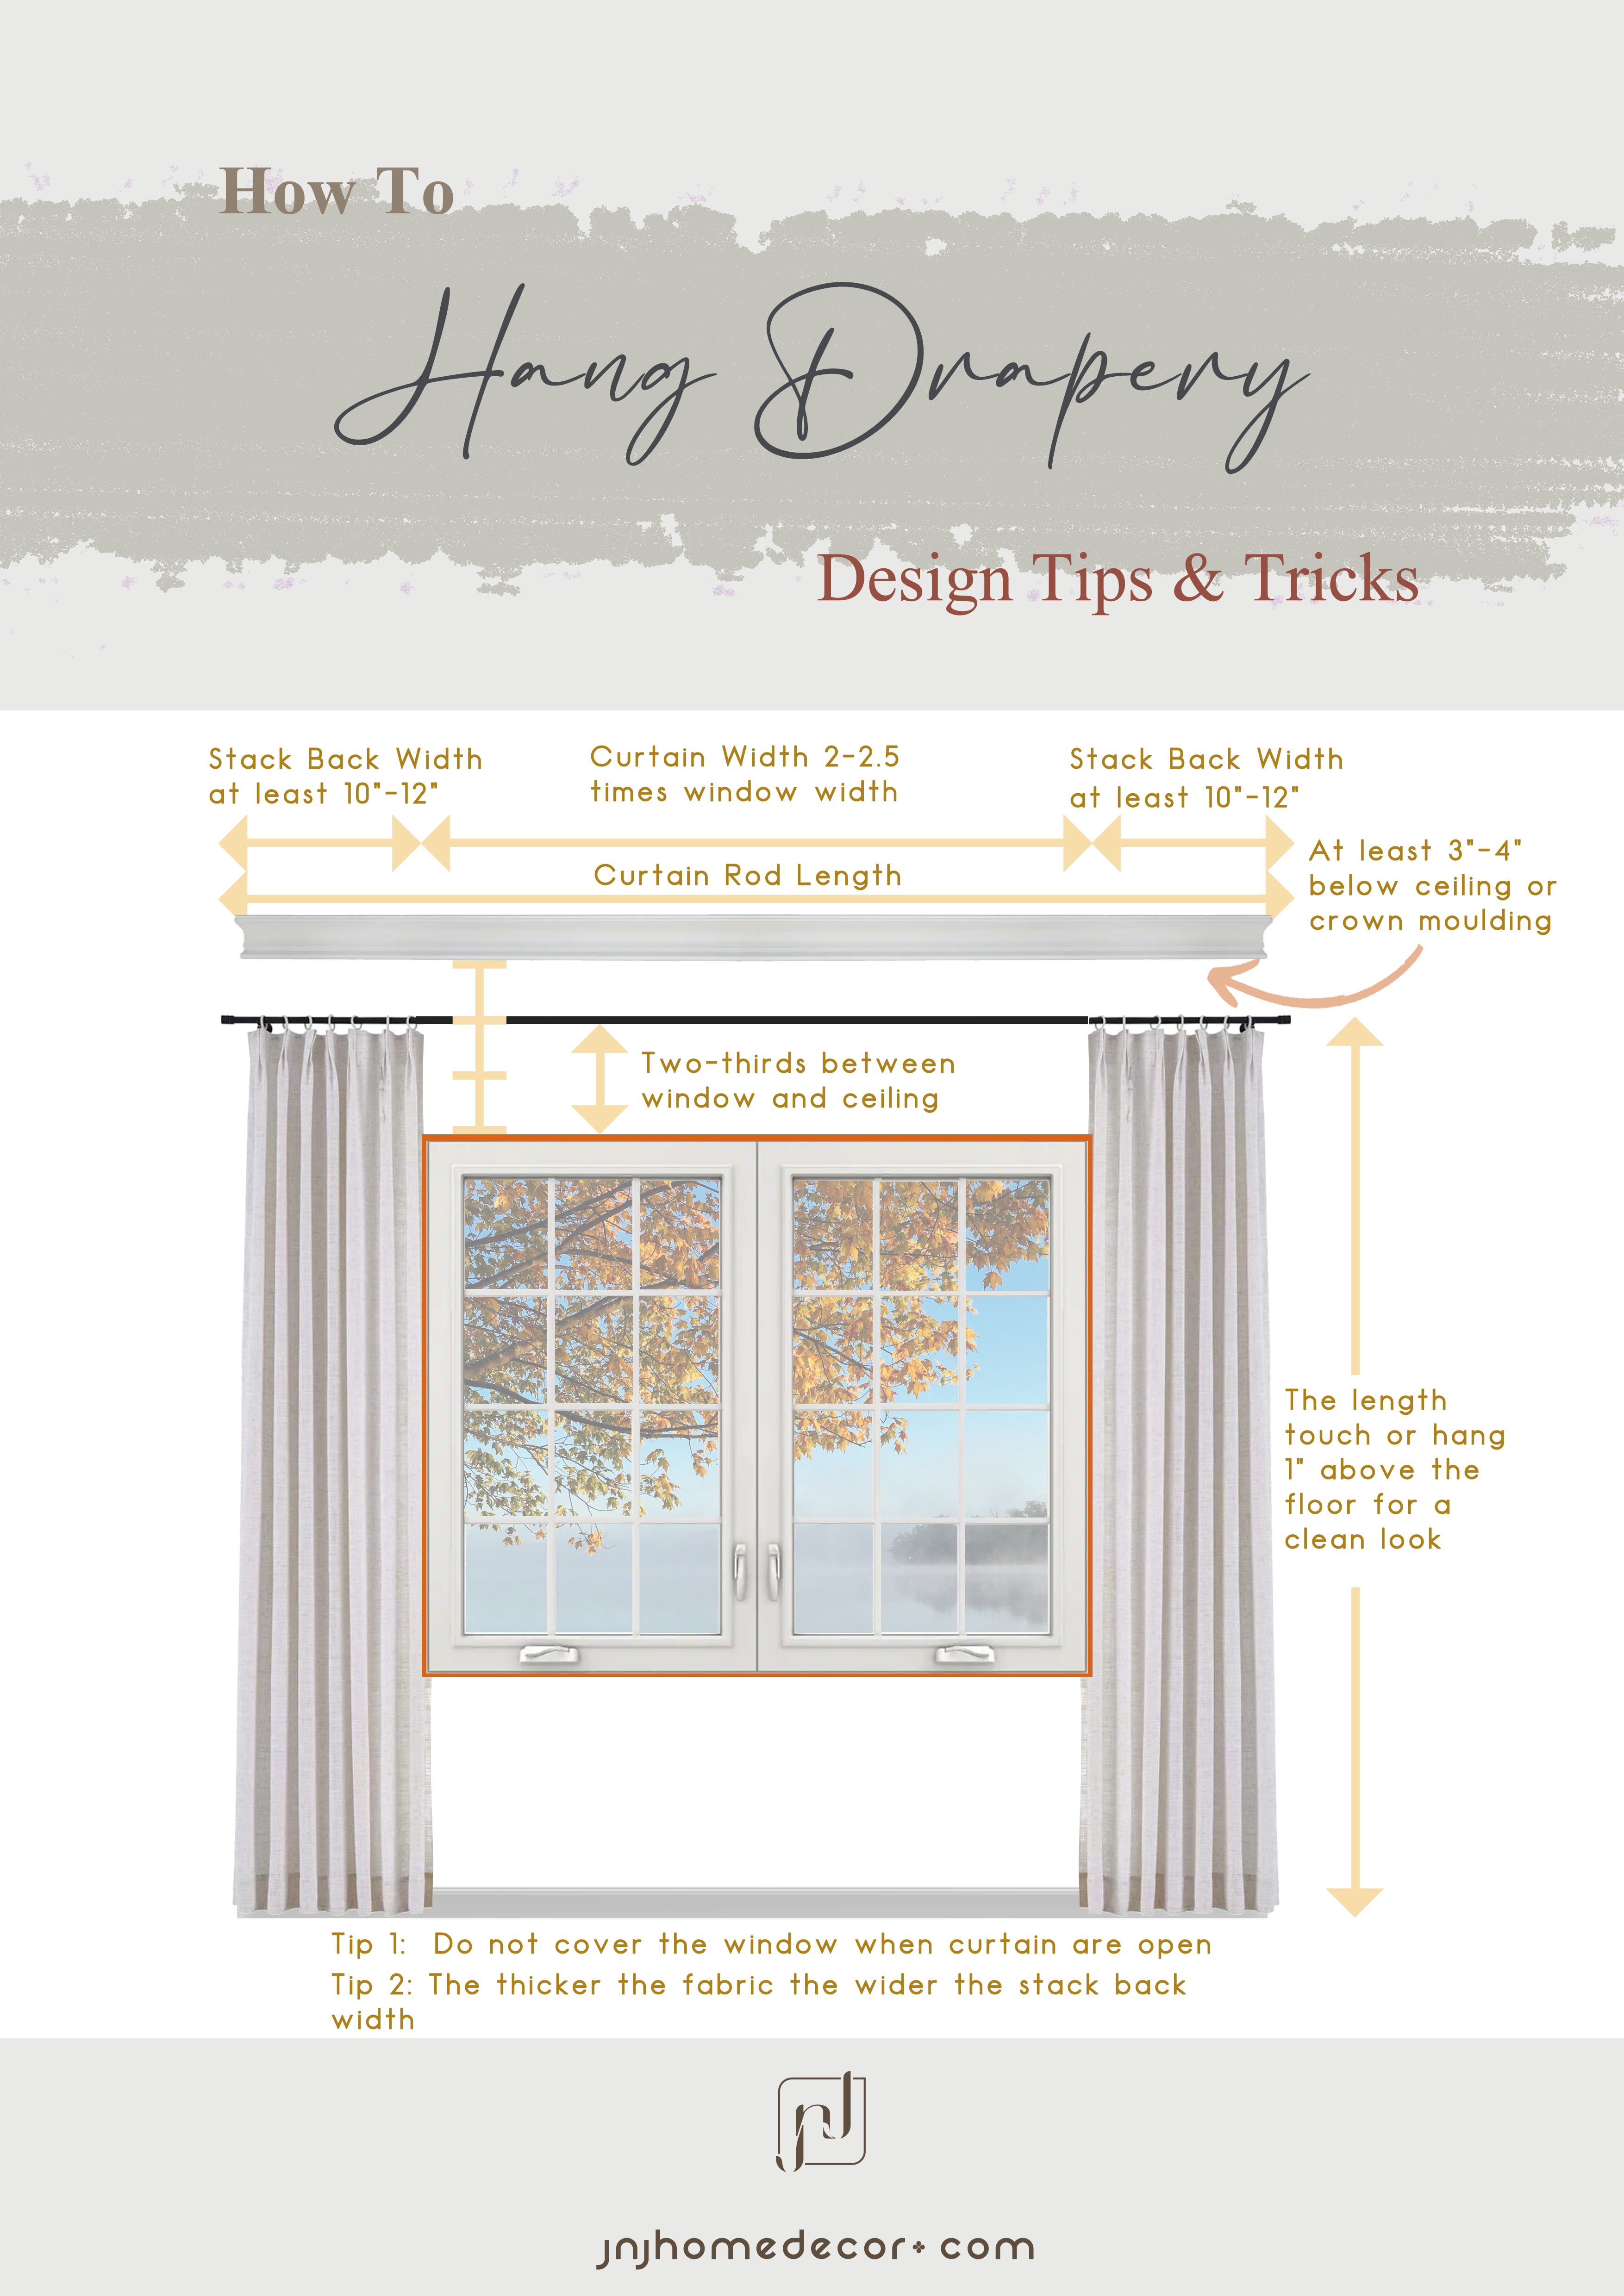 How to hang curtain and drapery